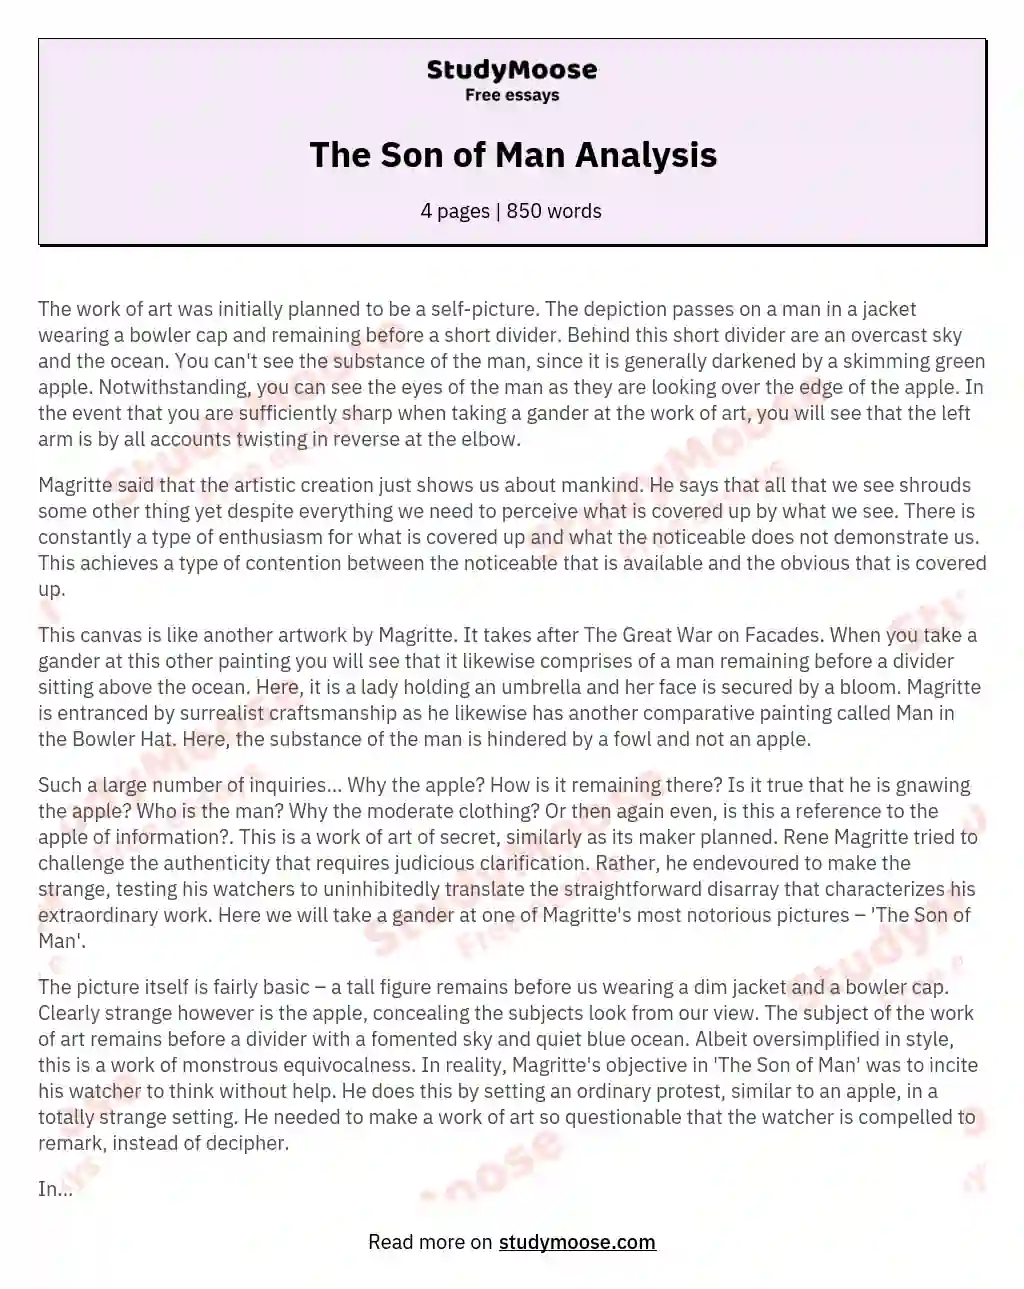 The Son of Man Analysis essay